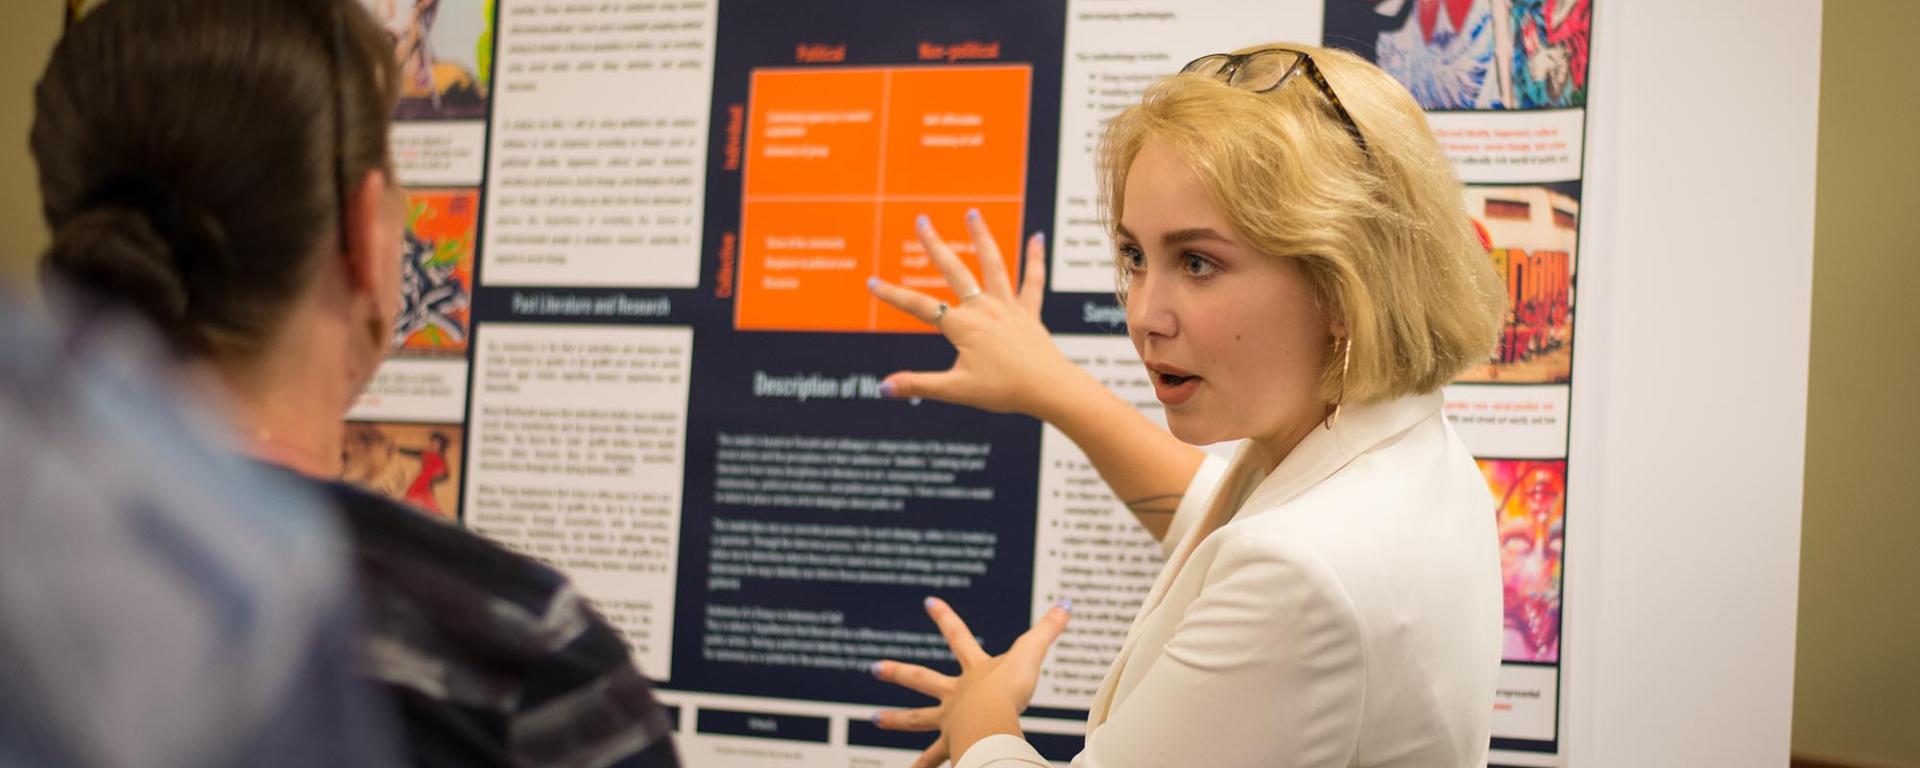 UNH student discussing research project